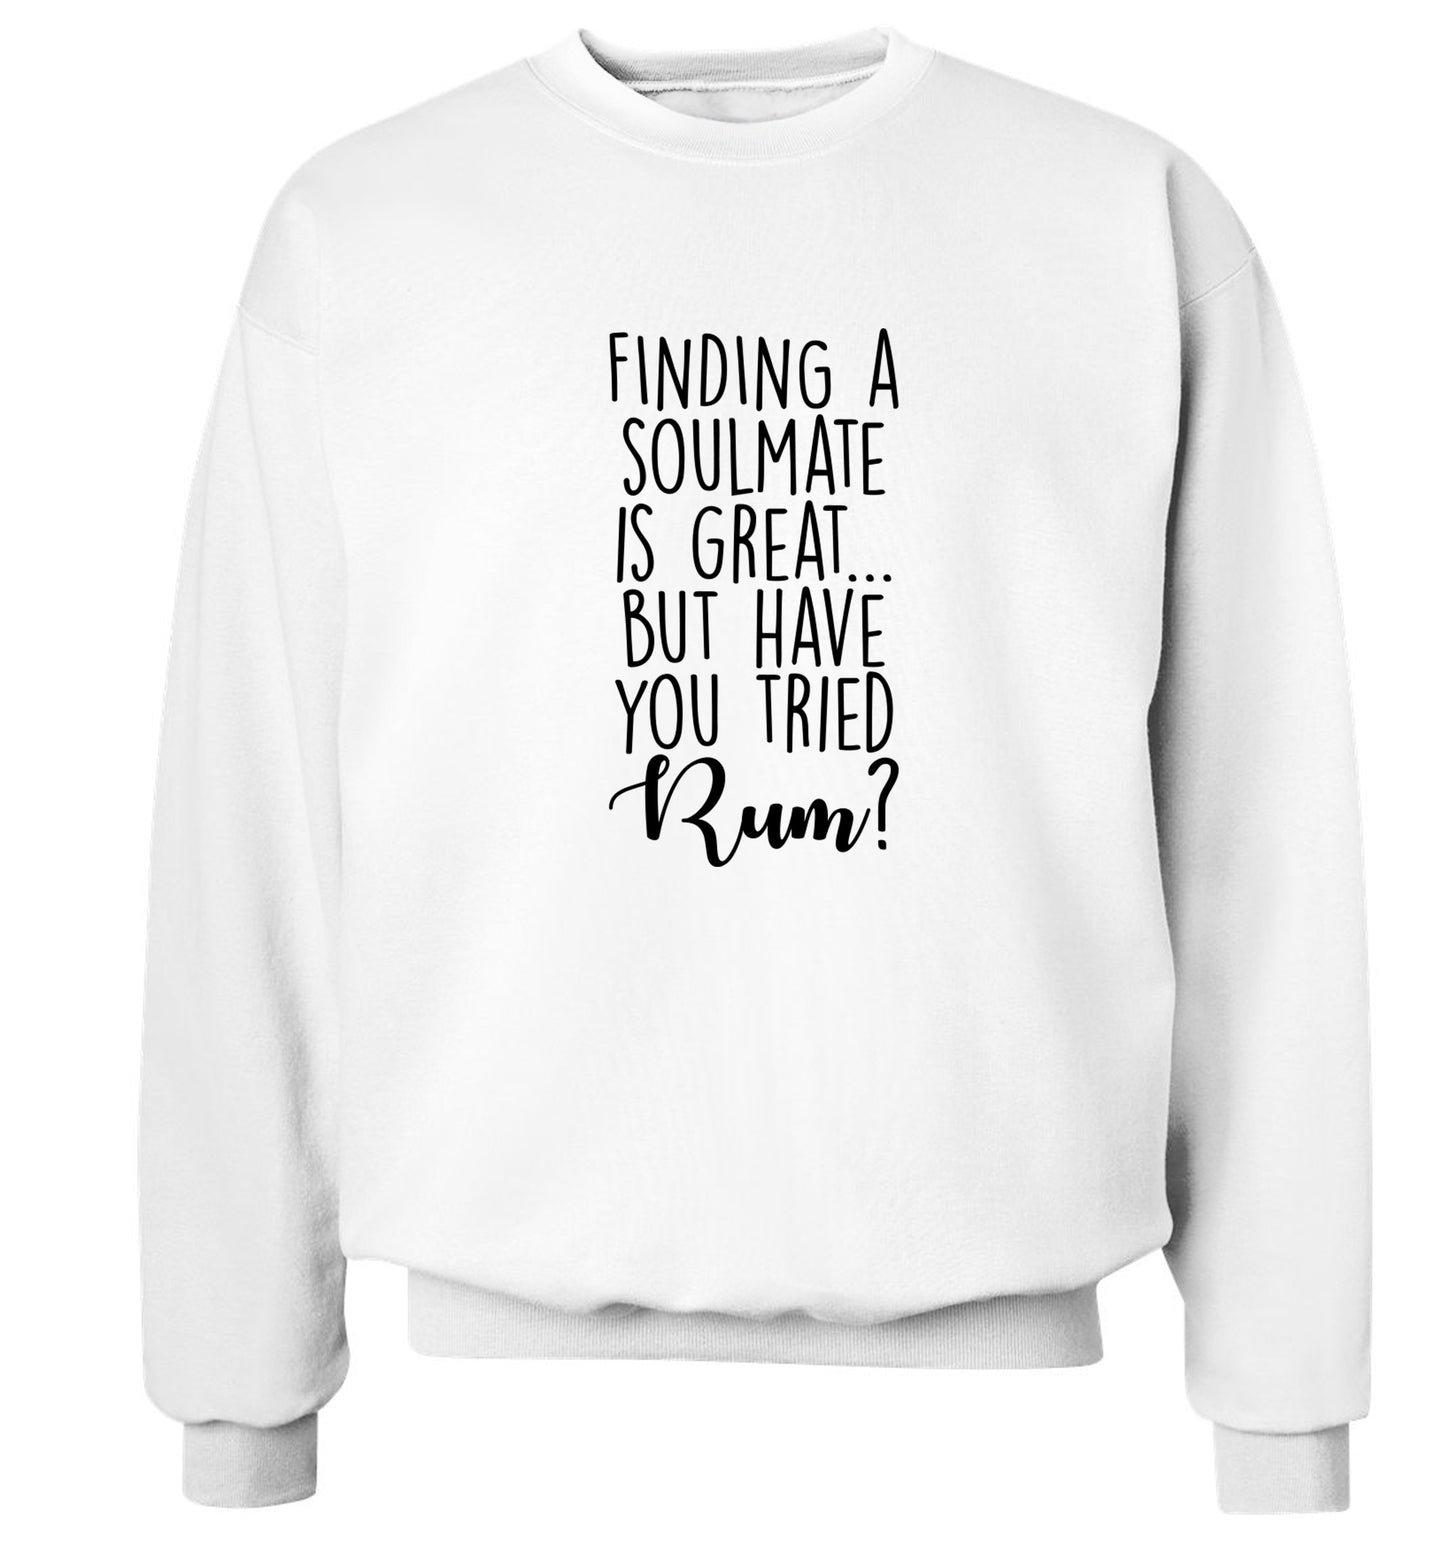 Finding a soulmate is great but have you tried rum? Adult's unisex white Sweater 2XL